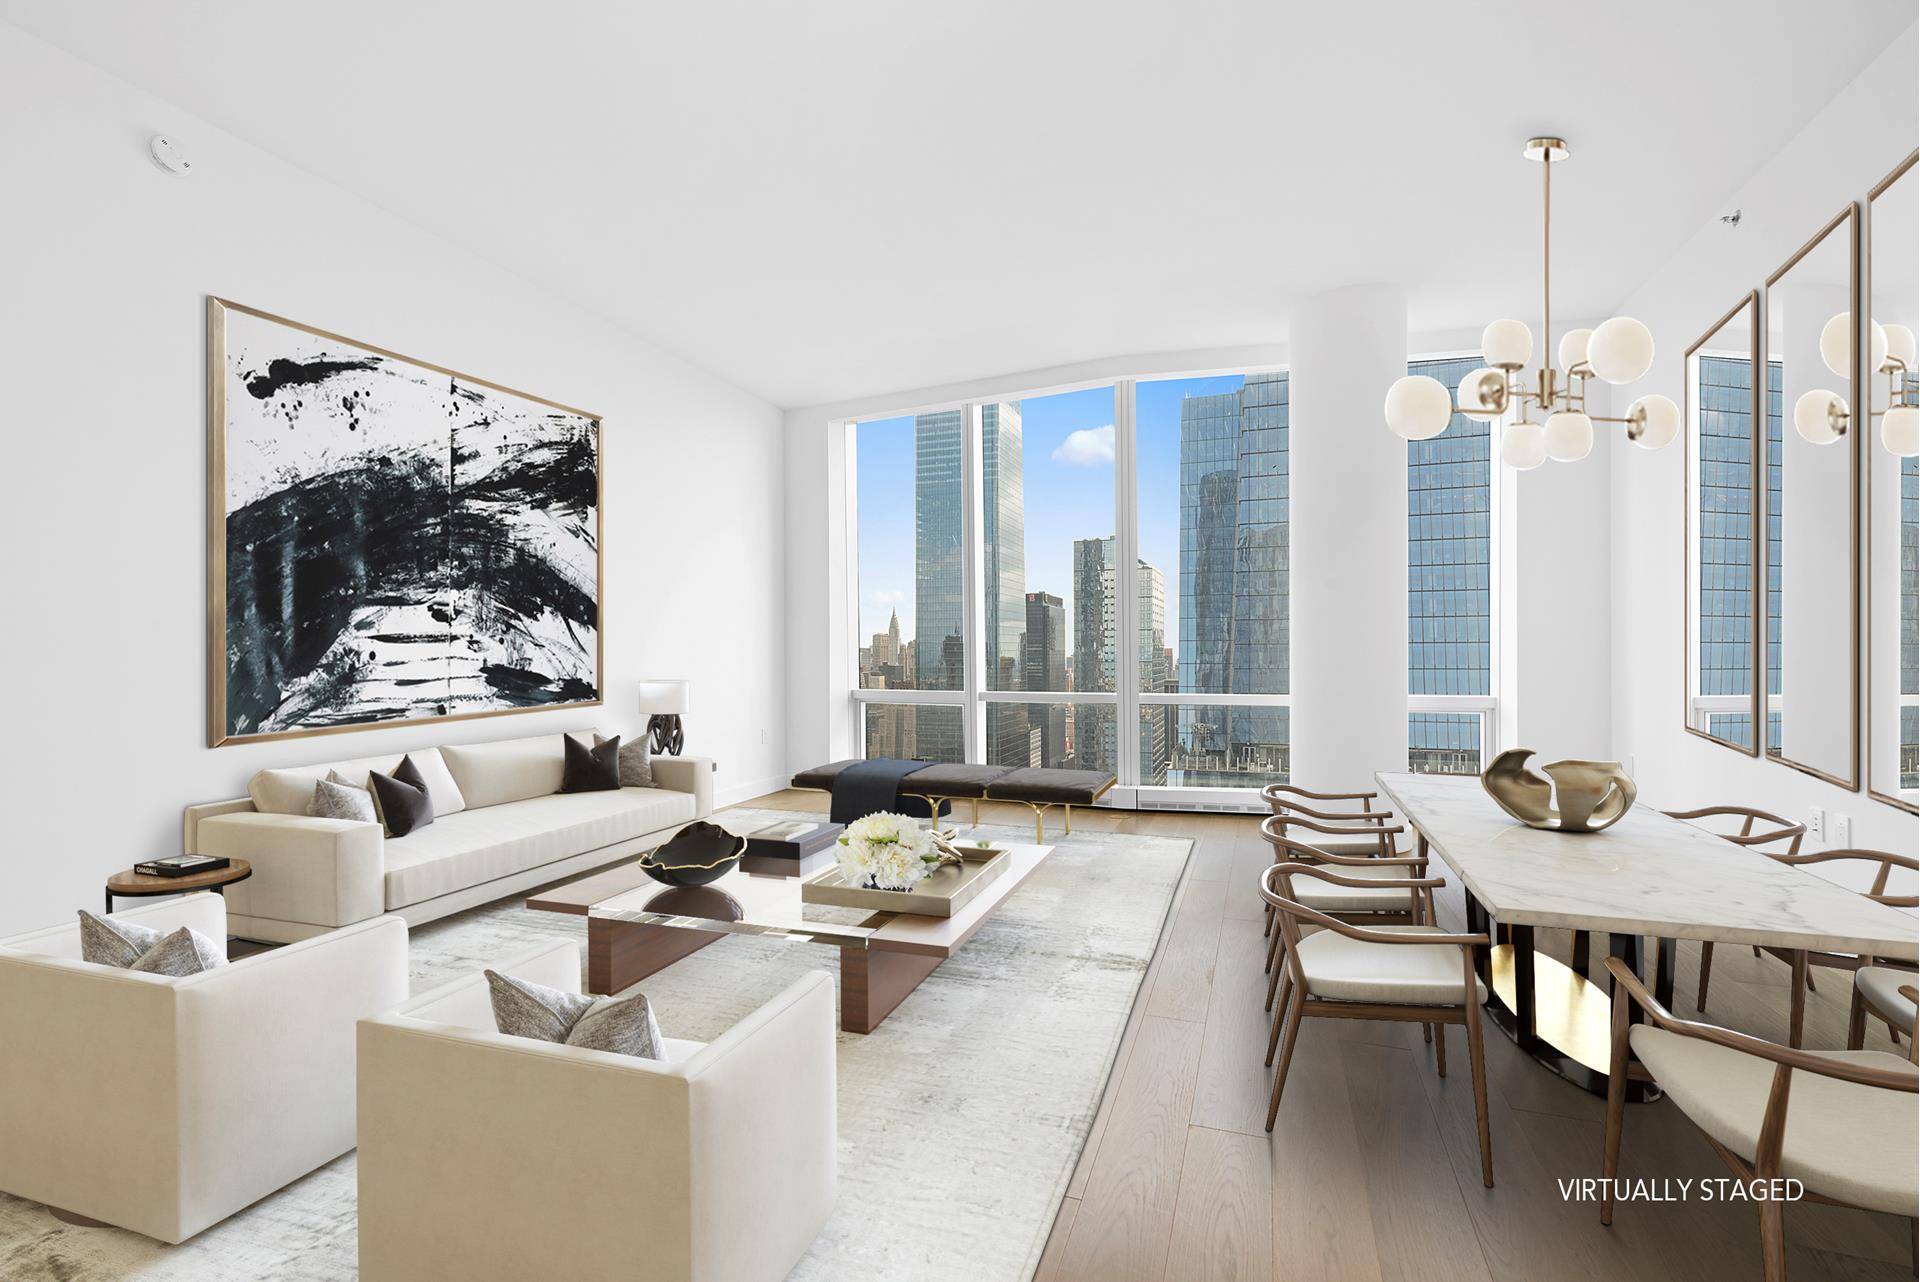 Available May 5. Two bedroom, 1, 818 square foot home in Hudson Yards features 10'7 floor to ceiling windows with east exposure offering spectacular views of the New York City ...